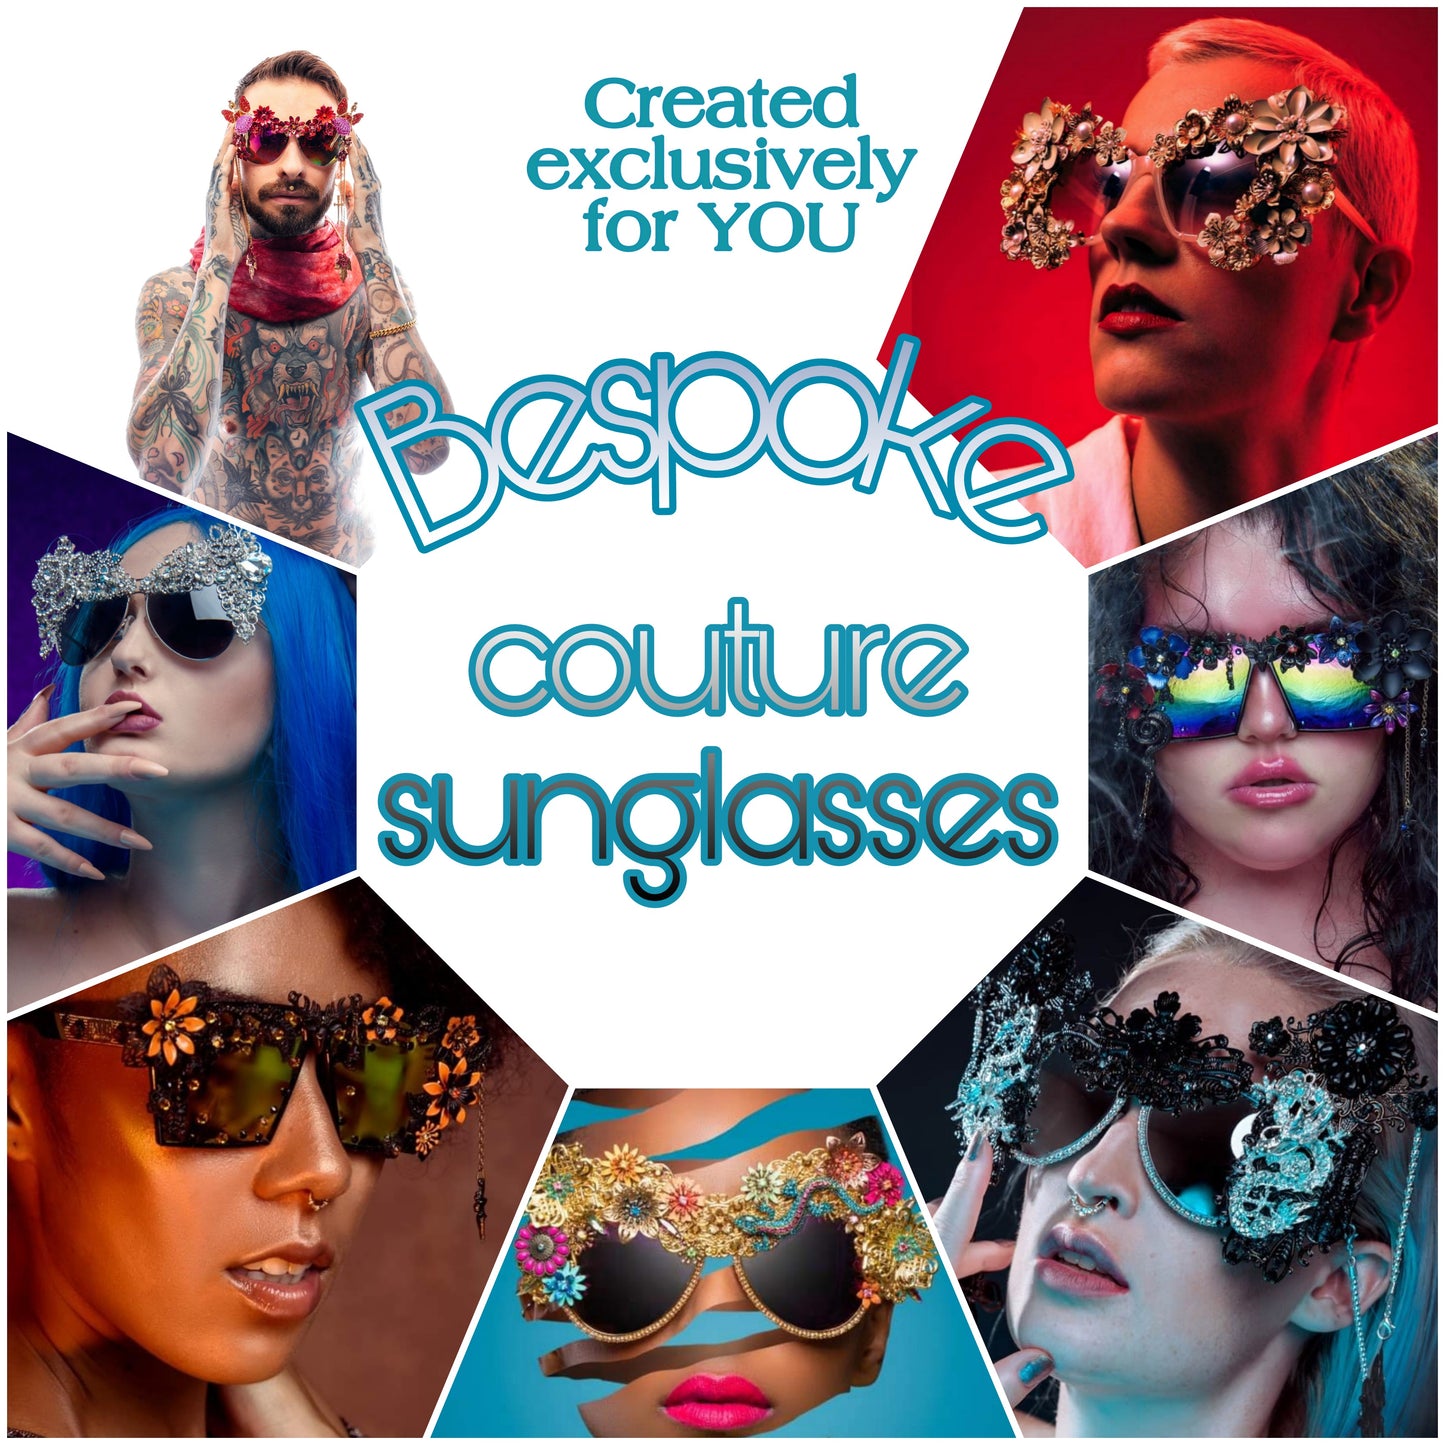 Bespoke order: Wearable art sunglasses, flamboyant showpiece sunnies (1 spot available for March - May 2024)